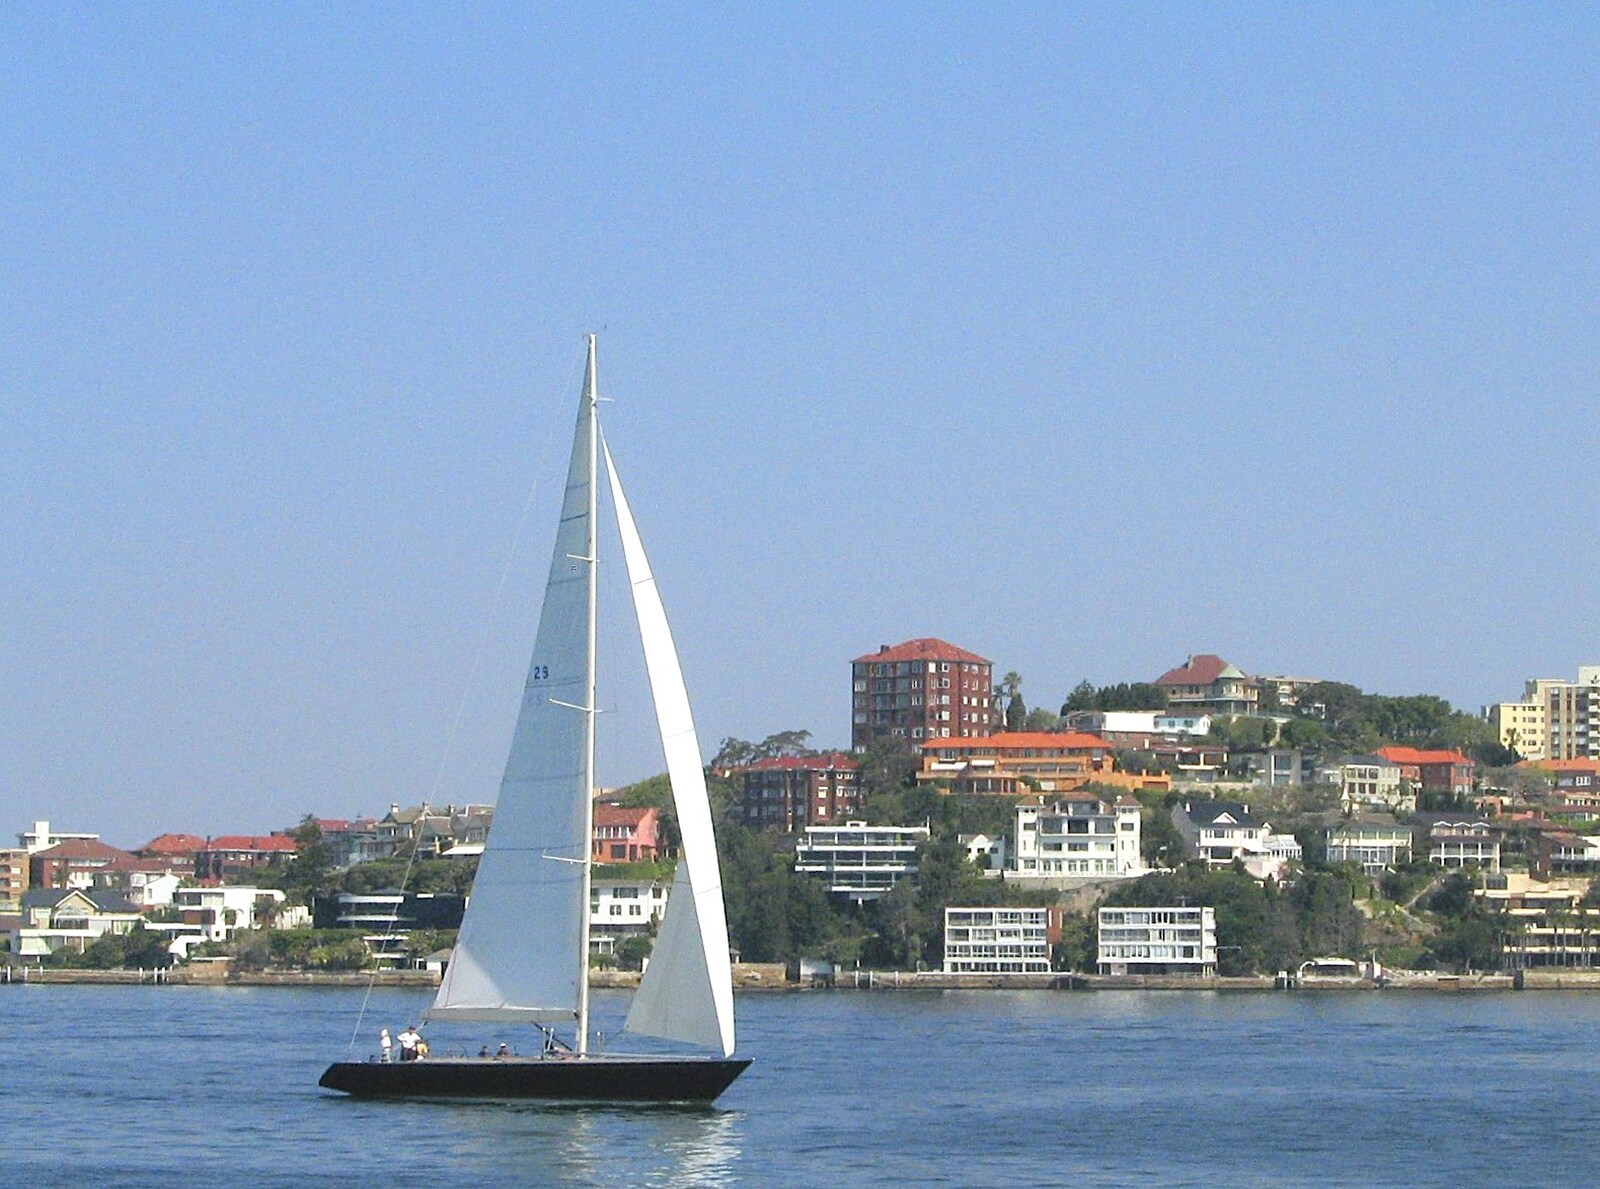 A yacht sails up the river from Sydney, New South Wales, Australia - 10th October 2004